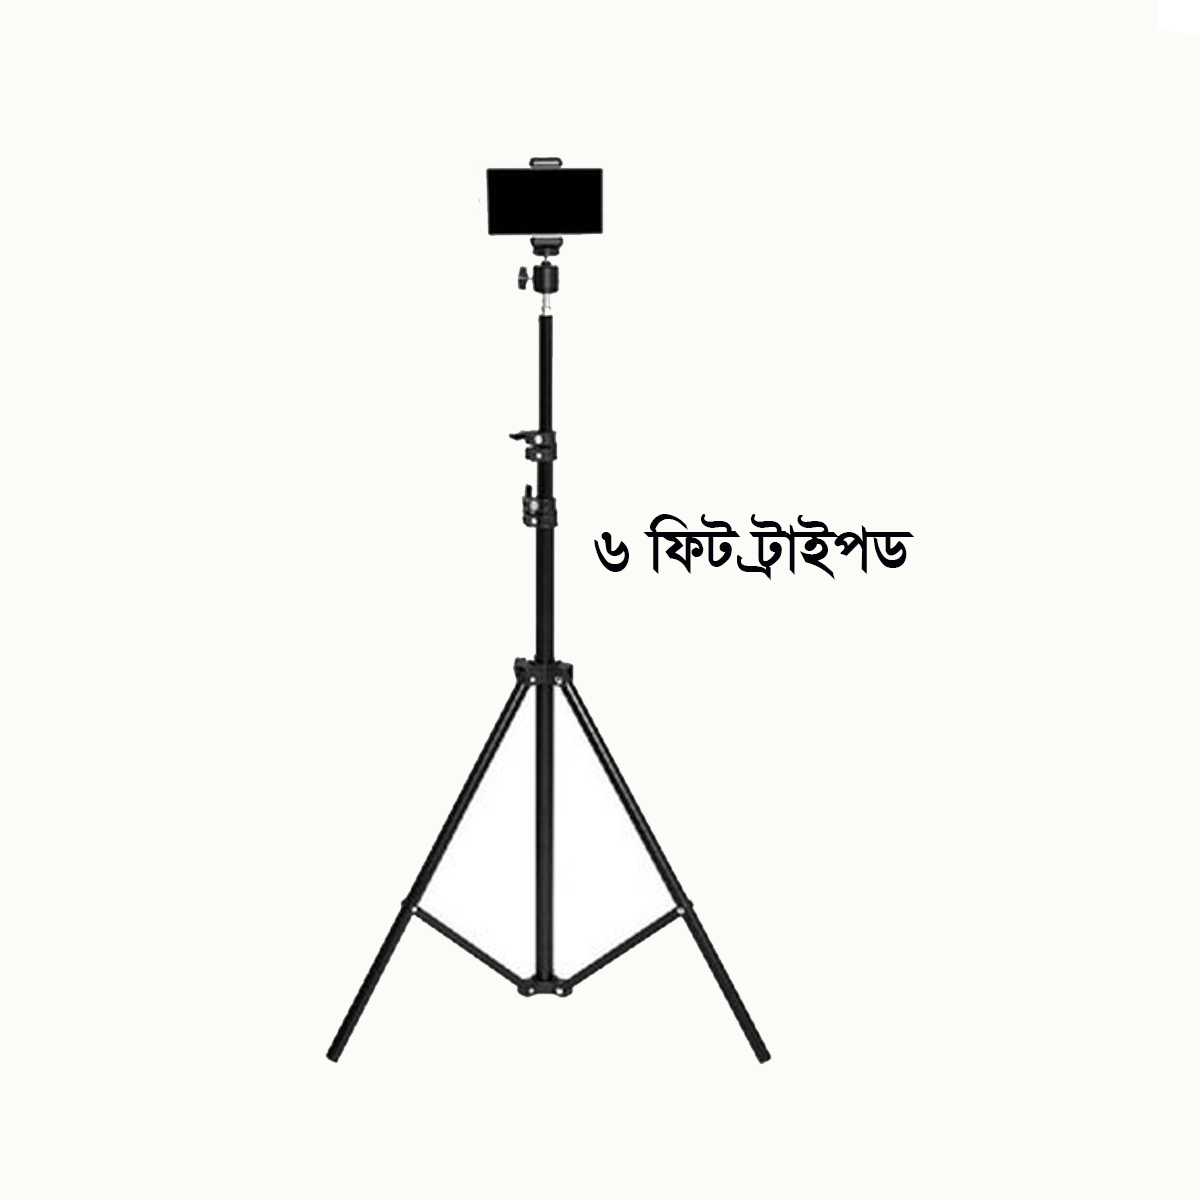 6 Fit Tripod Stand Product Code: 3609